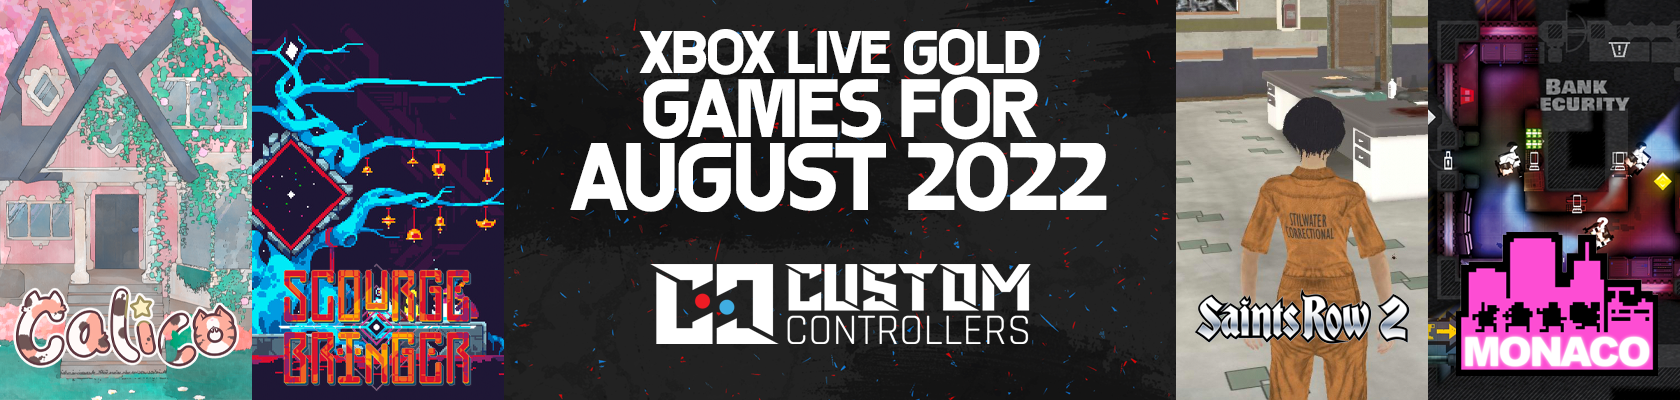 Games With Gold August 2022-Custom Controllers UK